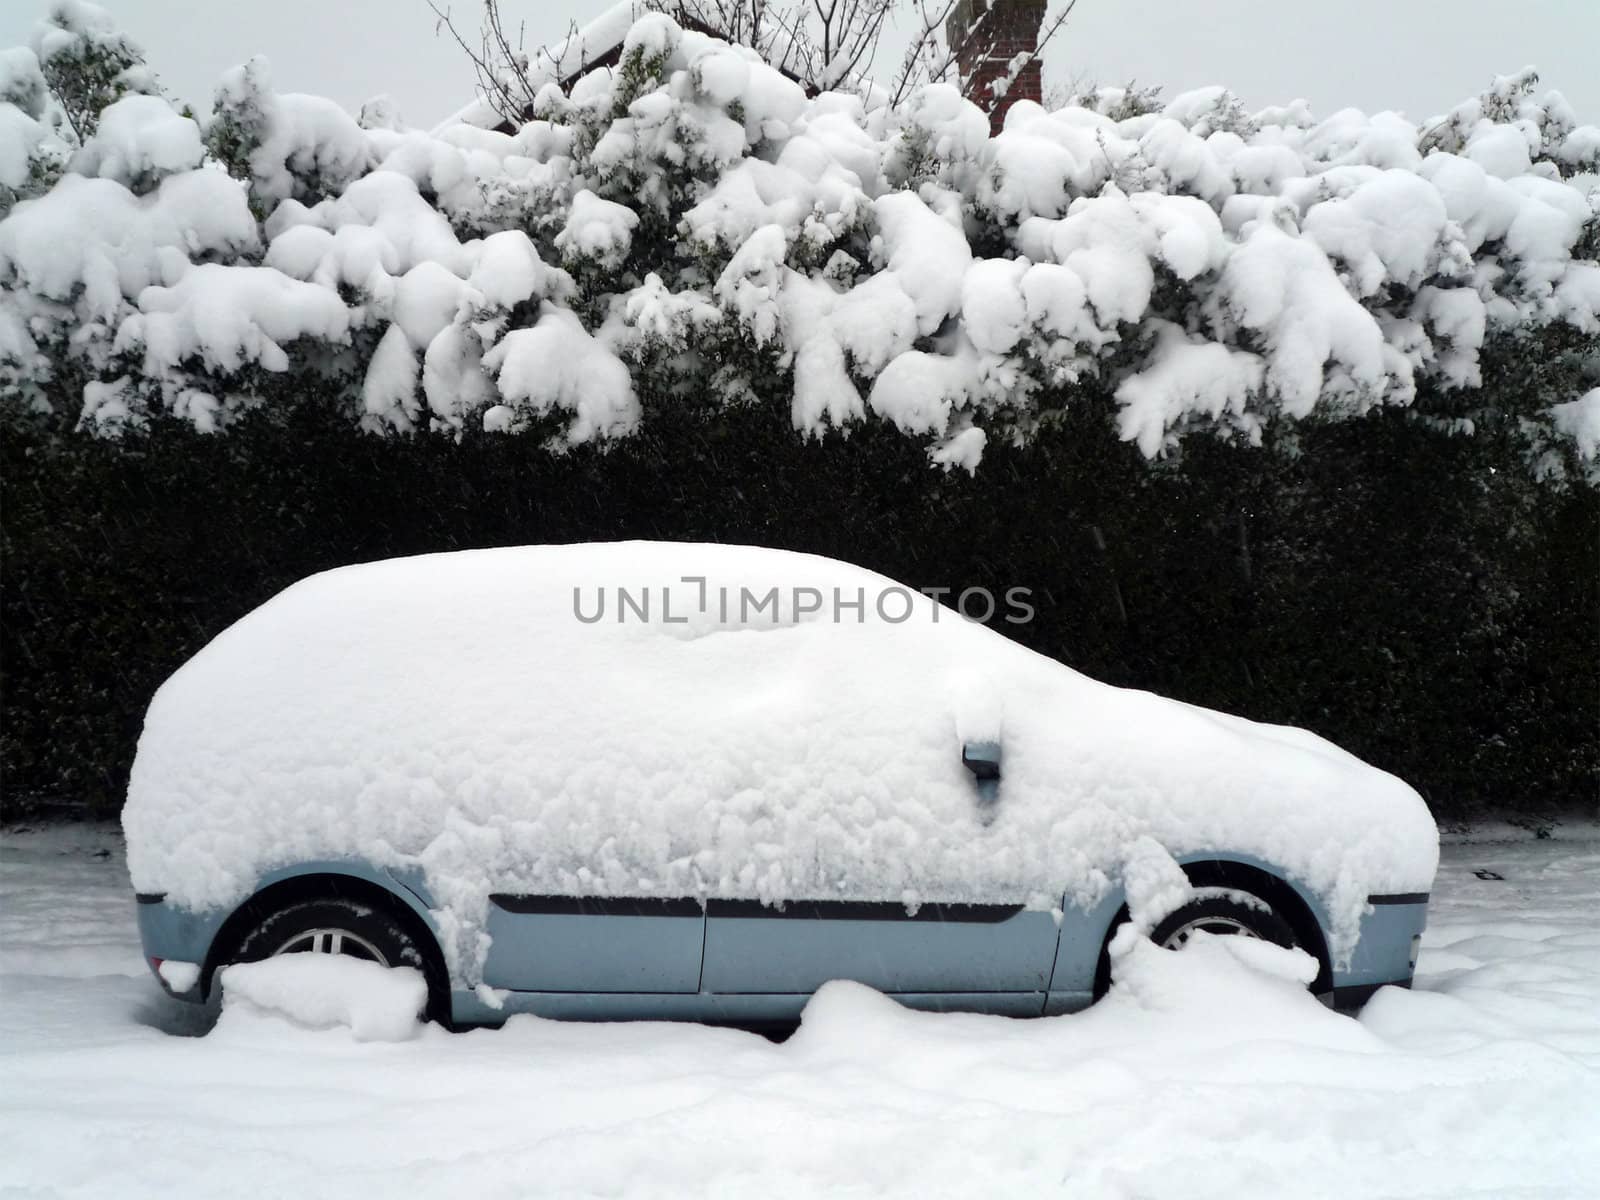 A car stuck in the snow during the winter season